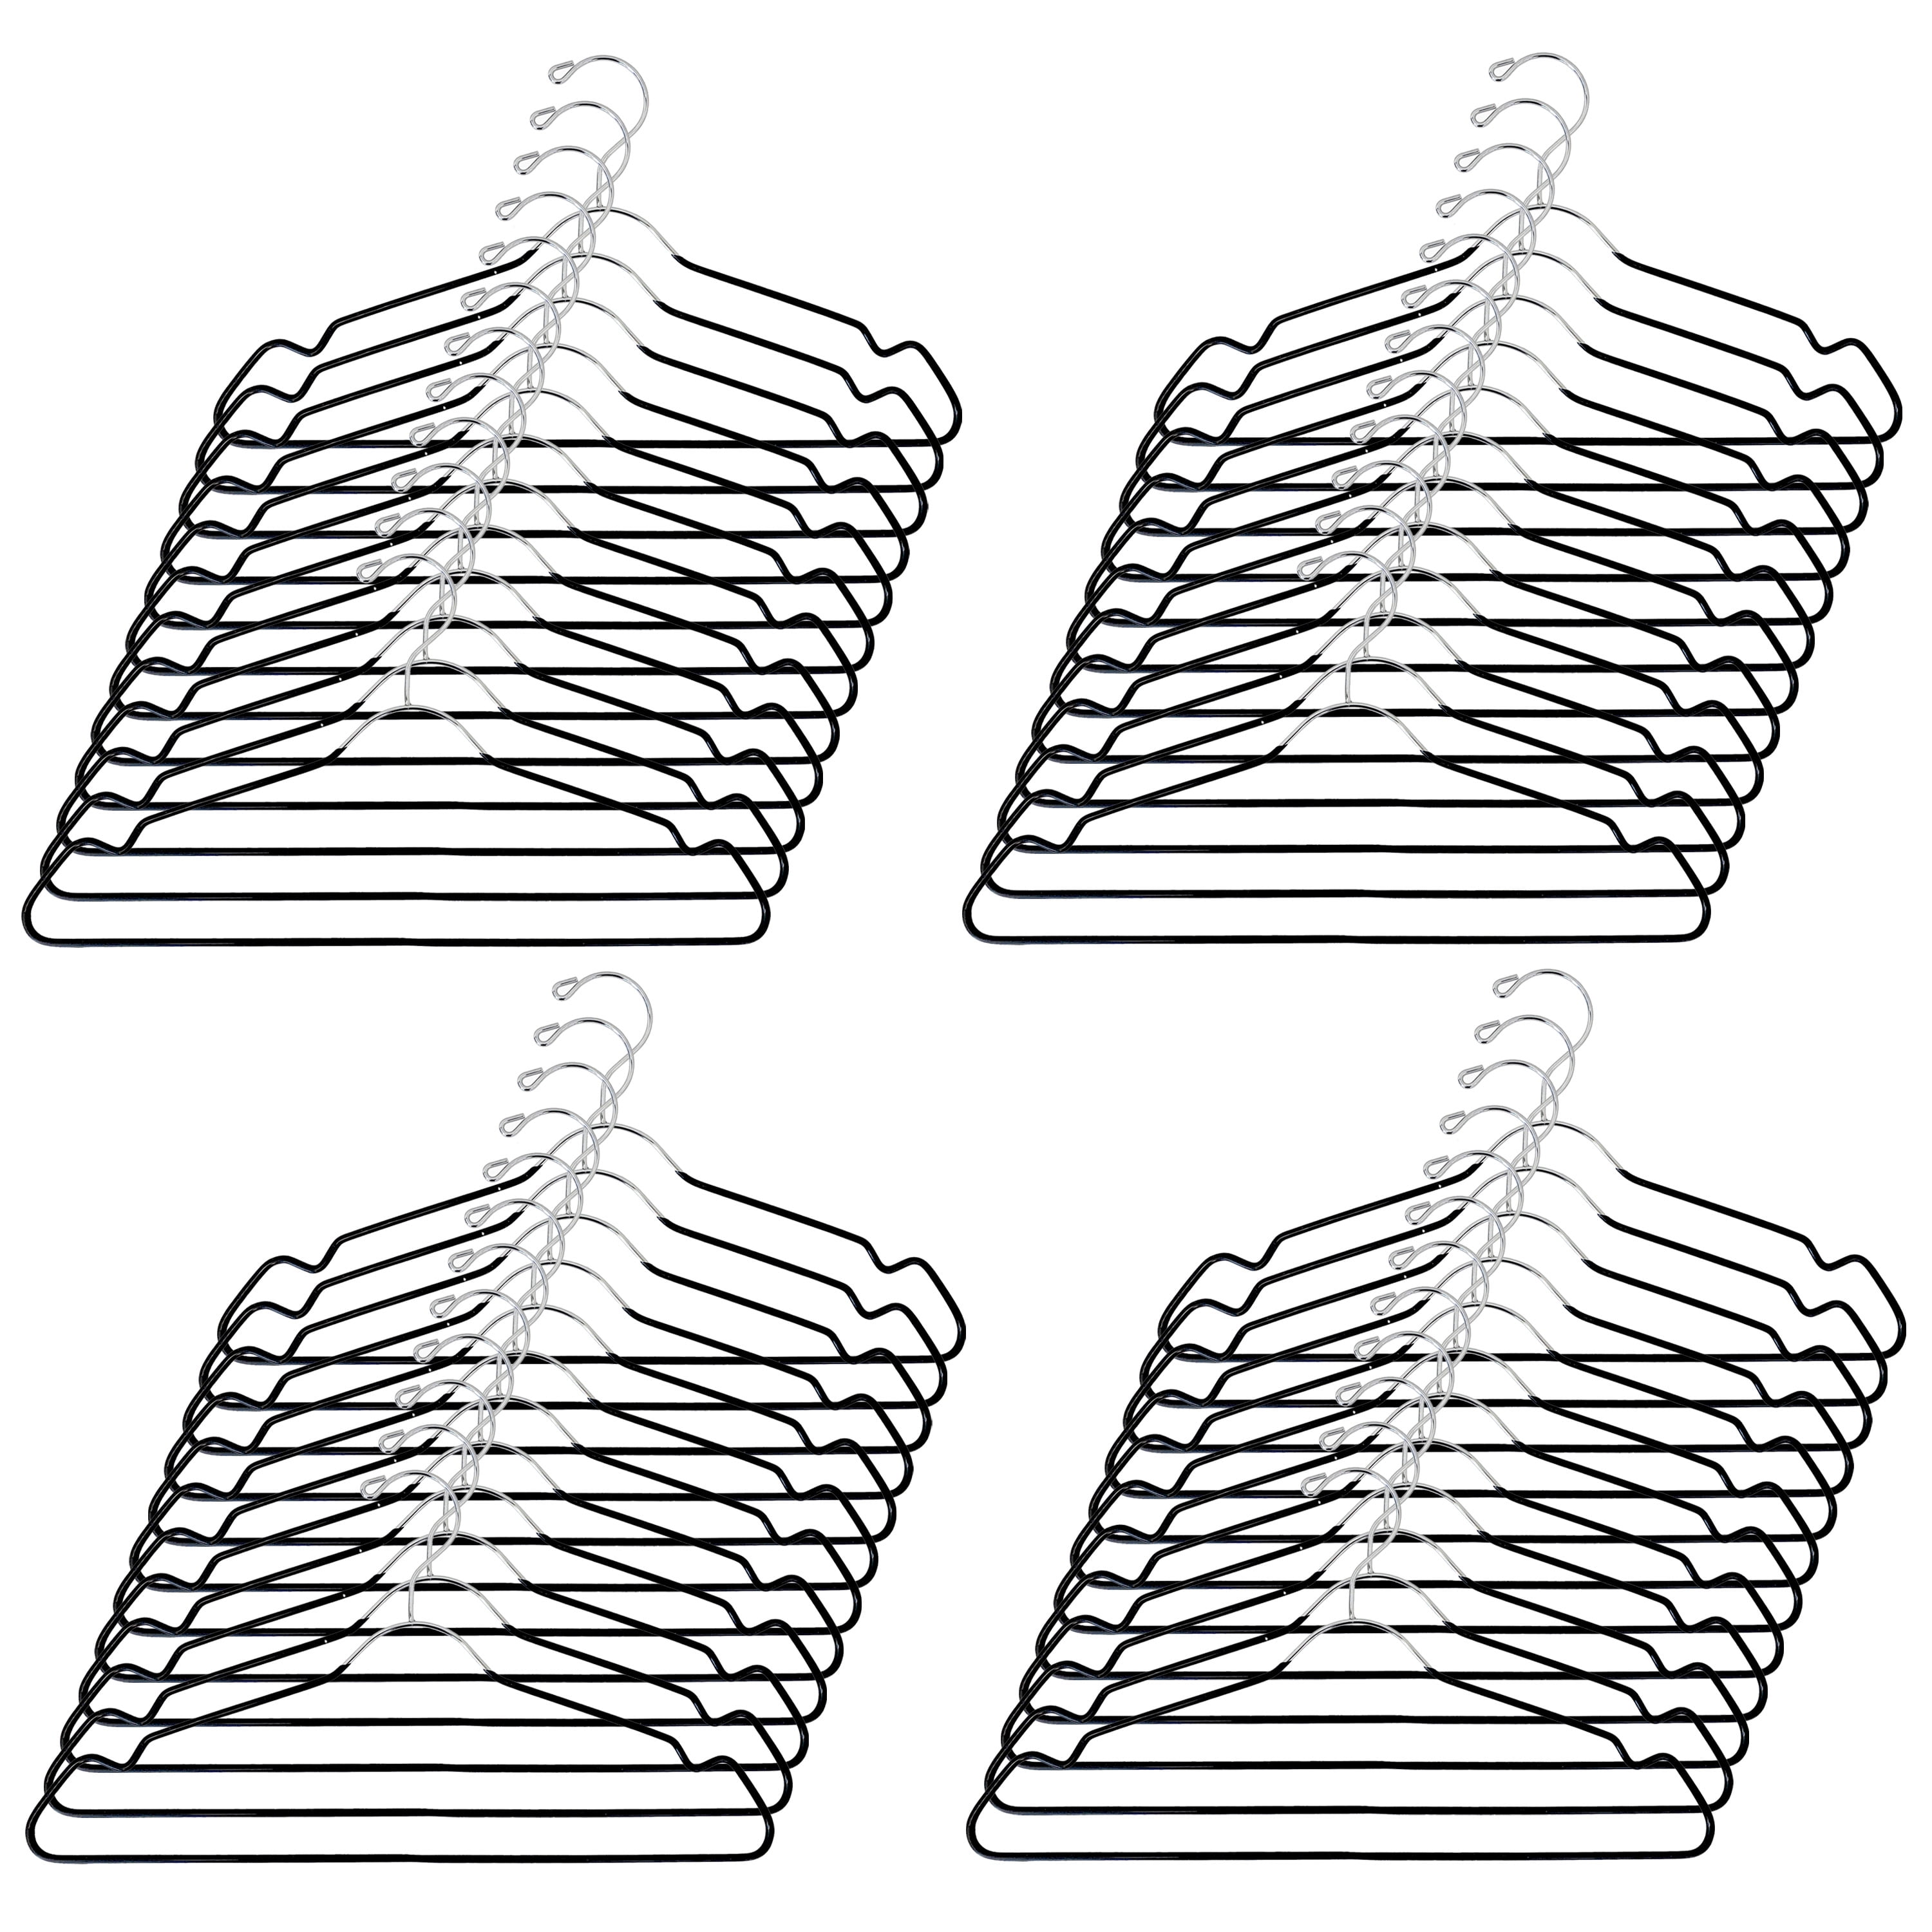 USTECH Strong Metal Clothes Hanger Set | Heavy Duty Coat, Pant, and Suit  Standard Hangers | Keep Your Clothes Organized and Wrinkle-Free | Pack of 12